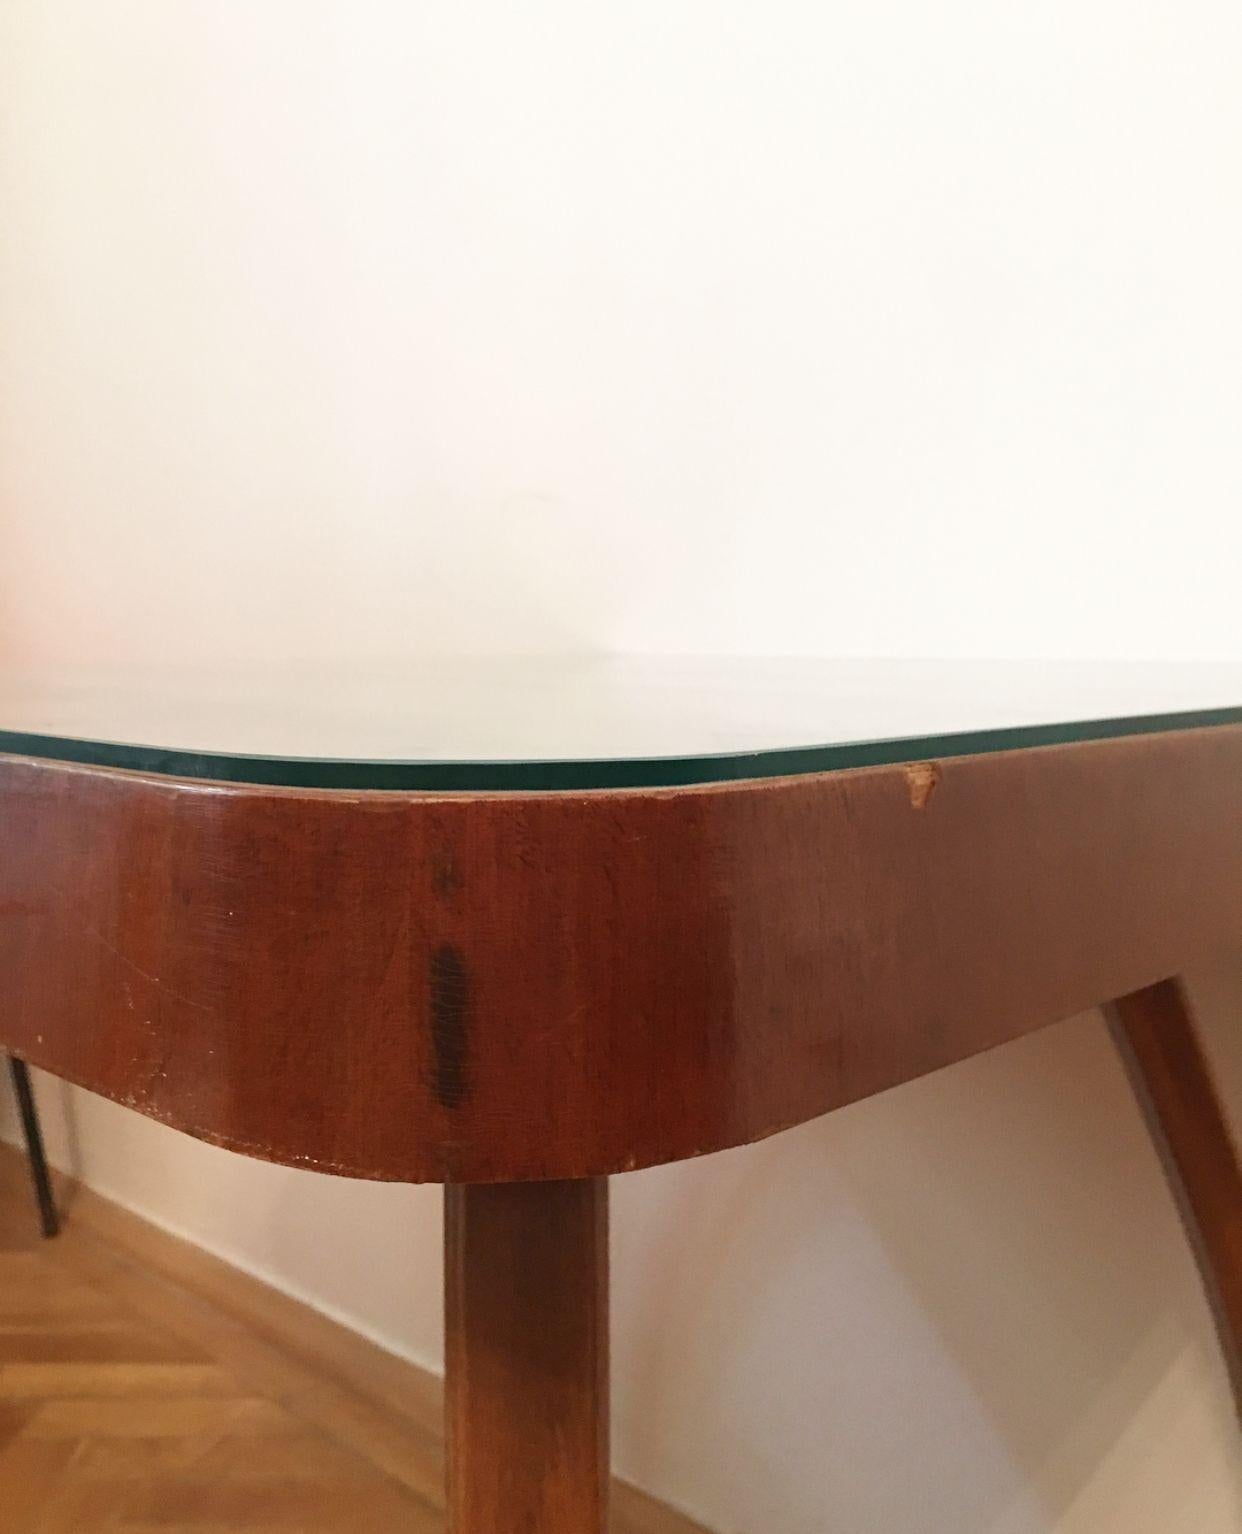 Very good condition, check photos. Wooden construction and slice of glass on the top of coffee table. Very unique piece made in 1960s in Czechoslovakia by designer Jindrich Halabala - in fabrique UP Závody Rousinov.